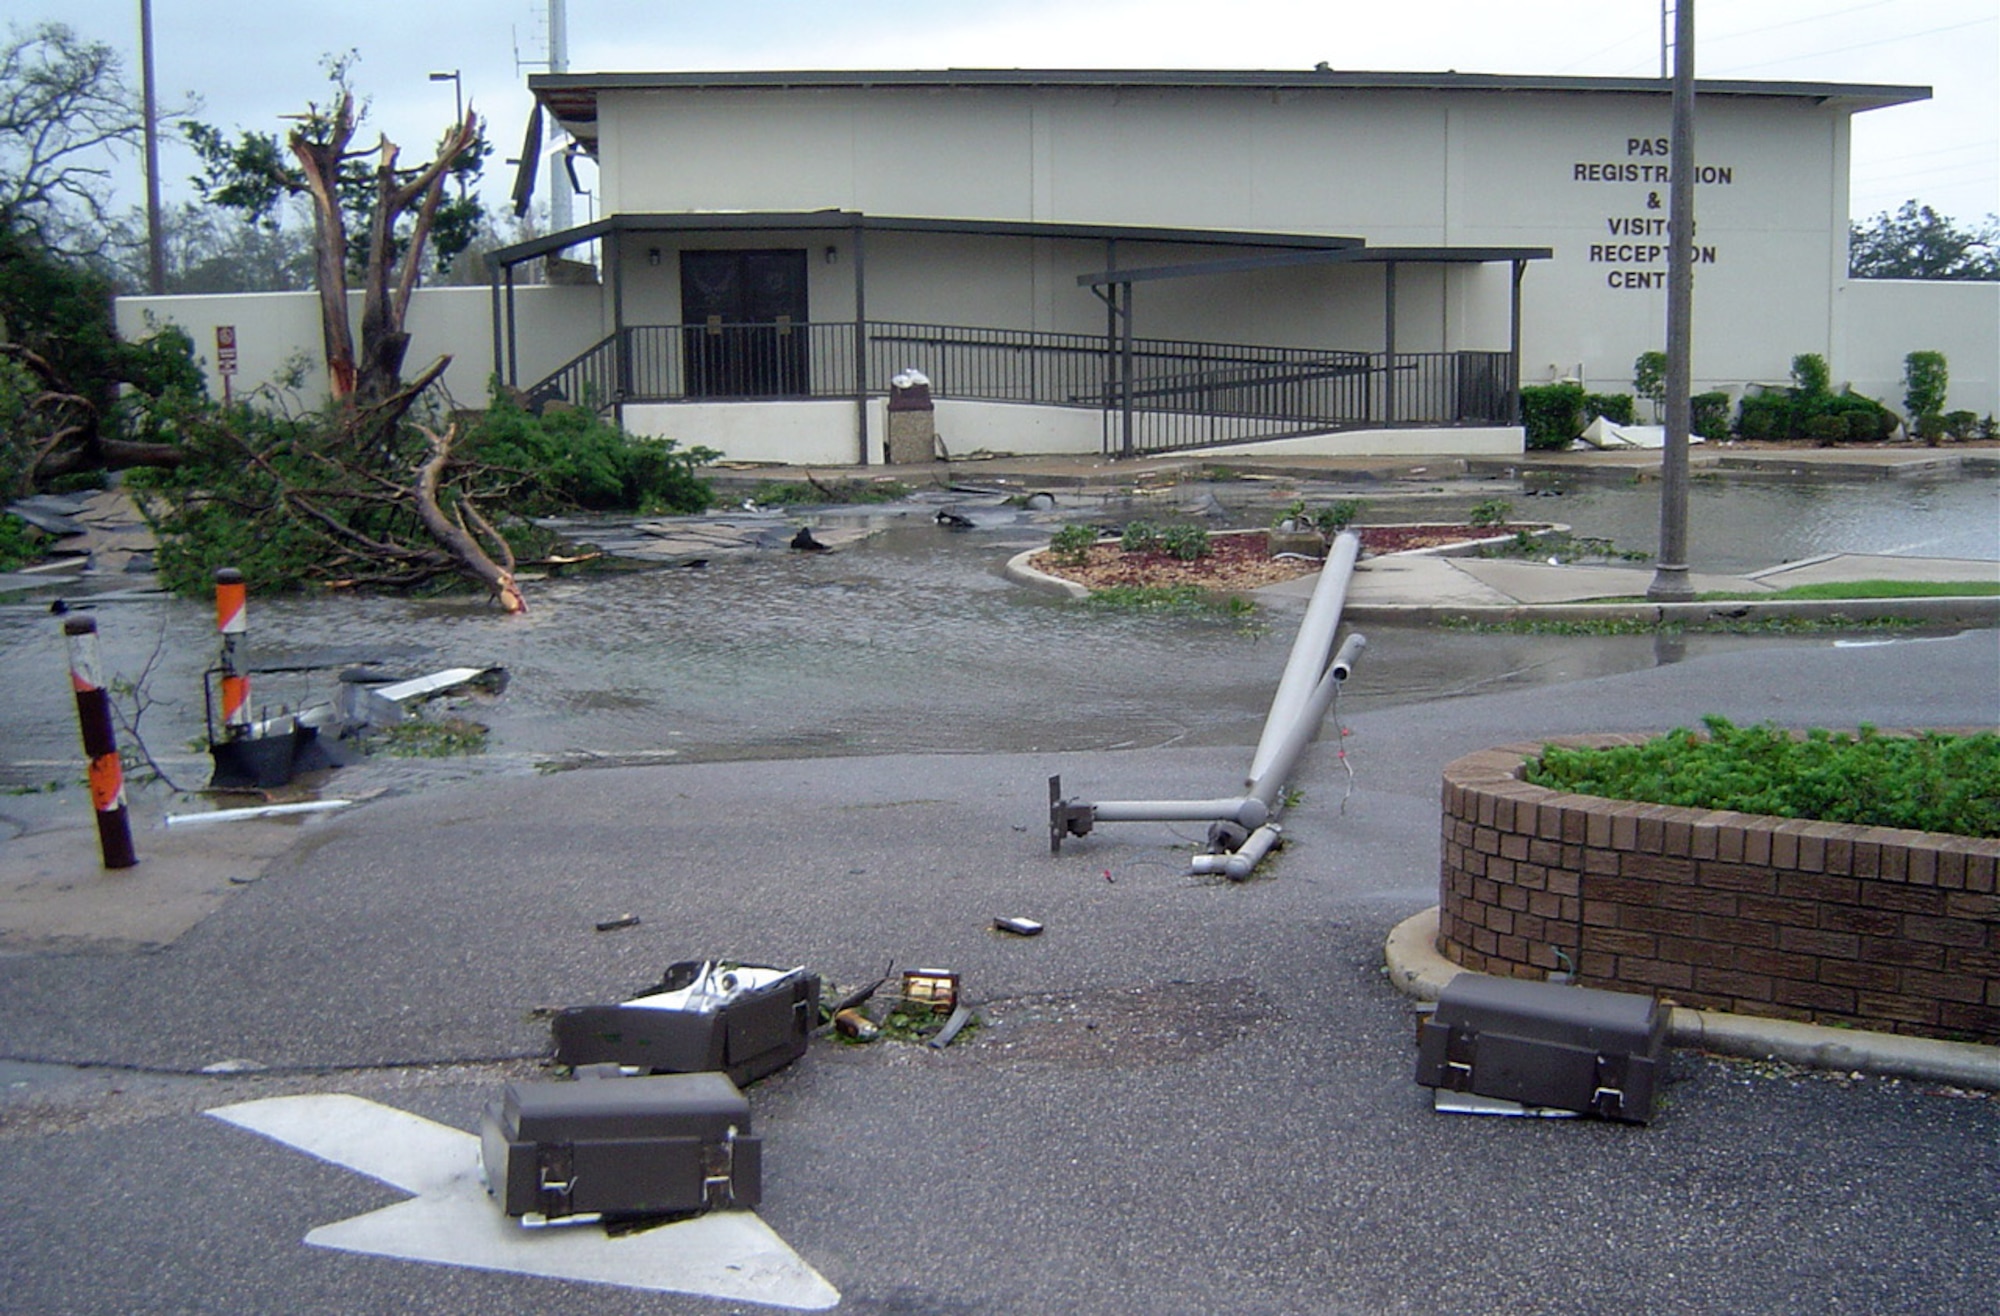 KEESLER AIR FORCE BASE, Miss. -- Facilities here received extensive damage following a direct hit on the base by Hurricane Katrina.  Officials are assessing the damage and are in contact with the Federal Emergency Management Agency.  (U.S. Air Force photo)